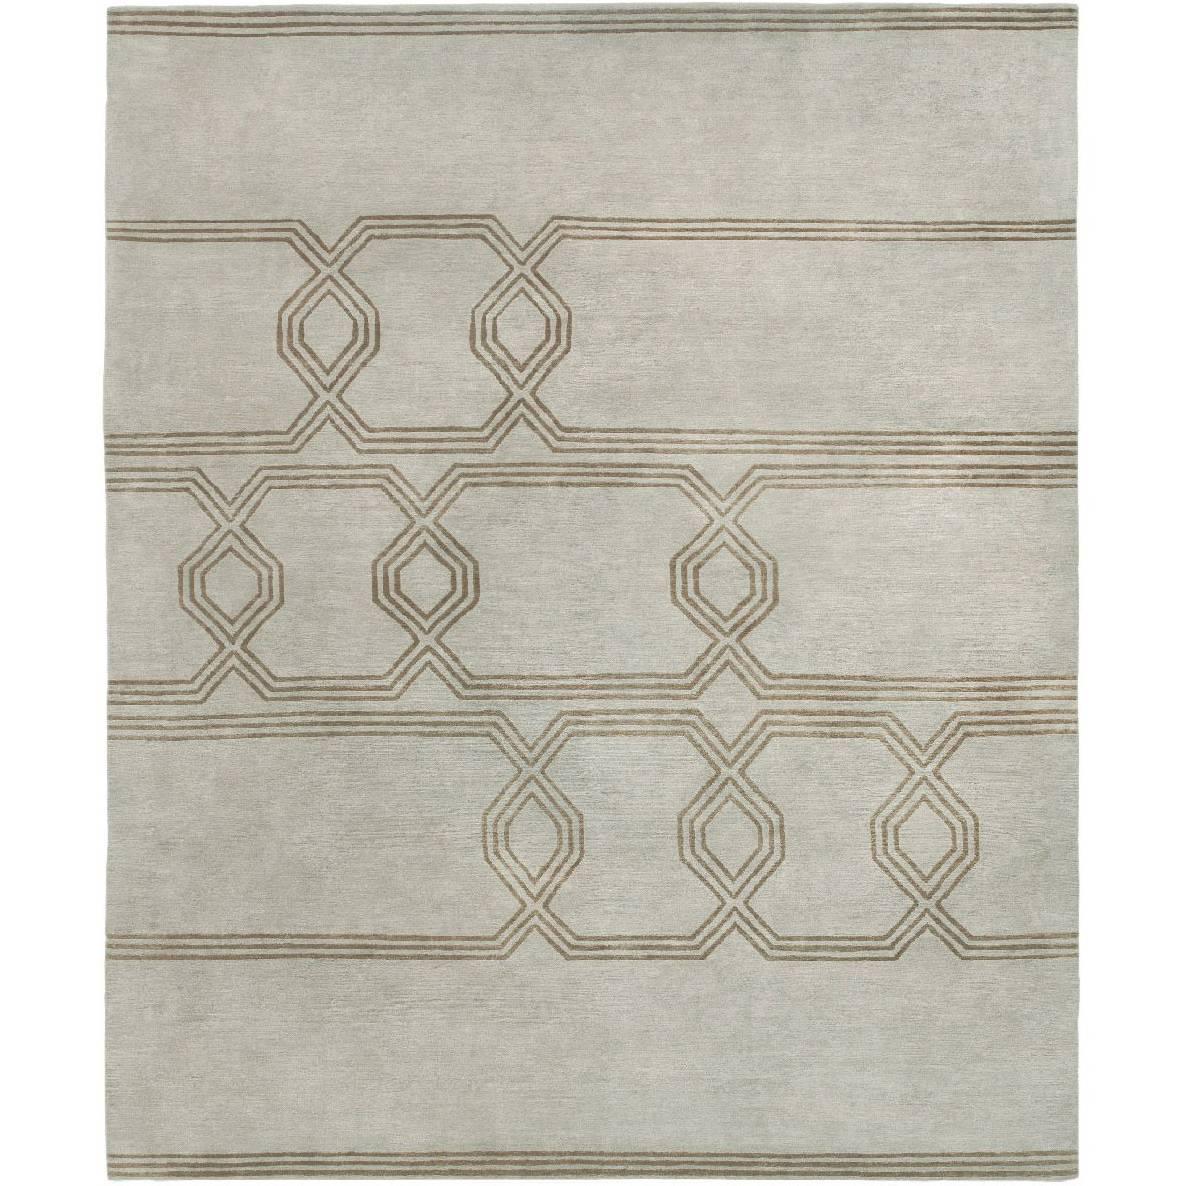 Contemporary Tibetan Rug Hand-Knotted in Nepal, Light Grey - Green Brown For Sale